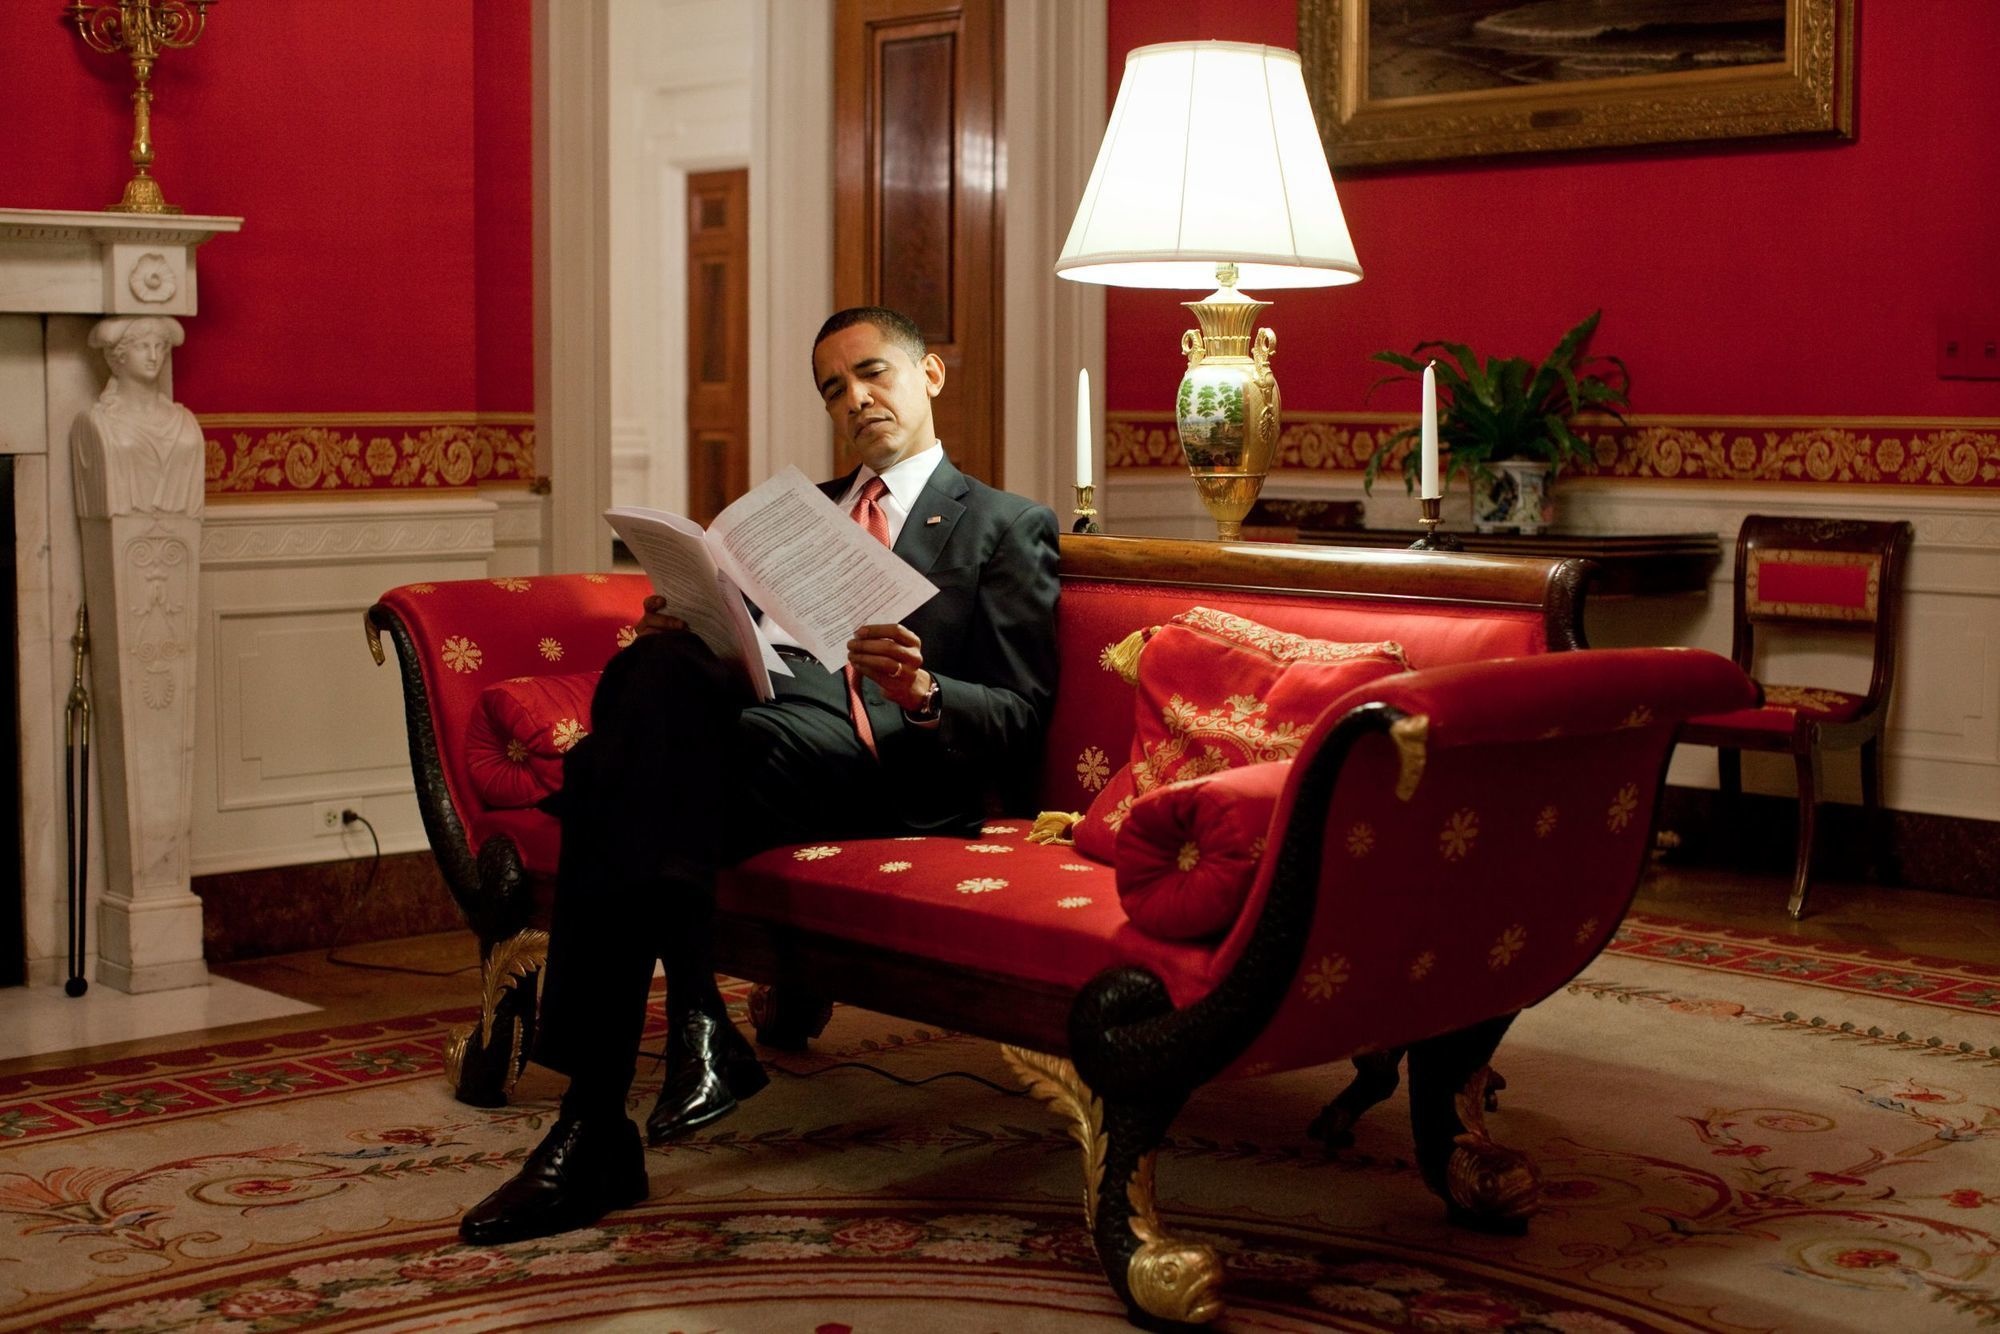 President Obama has read every single Harry Potter book.